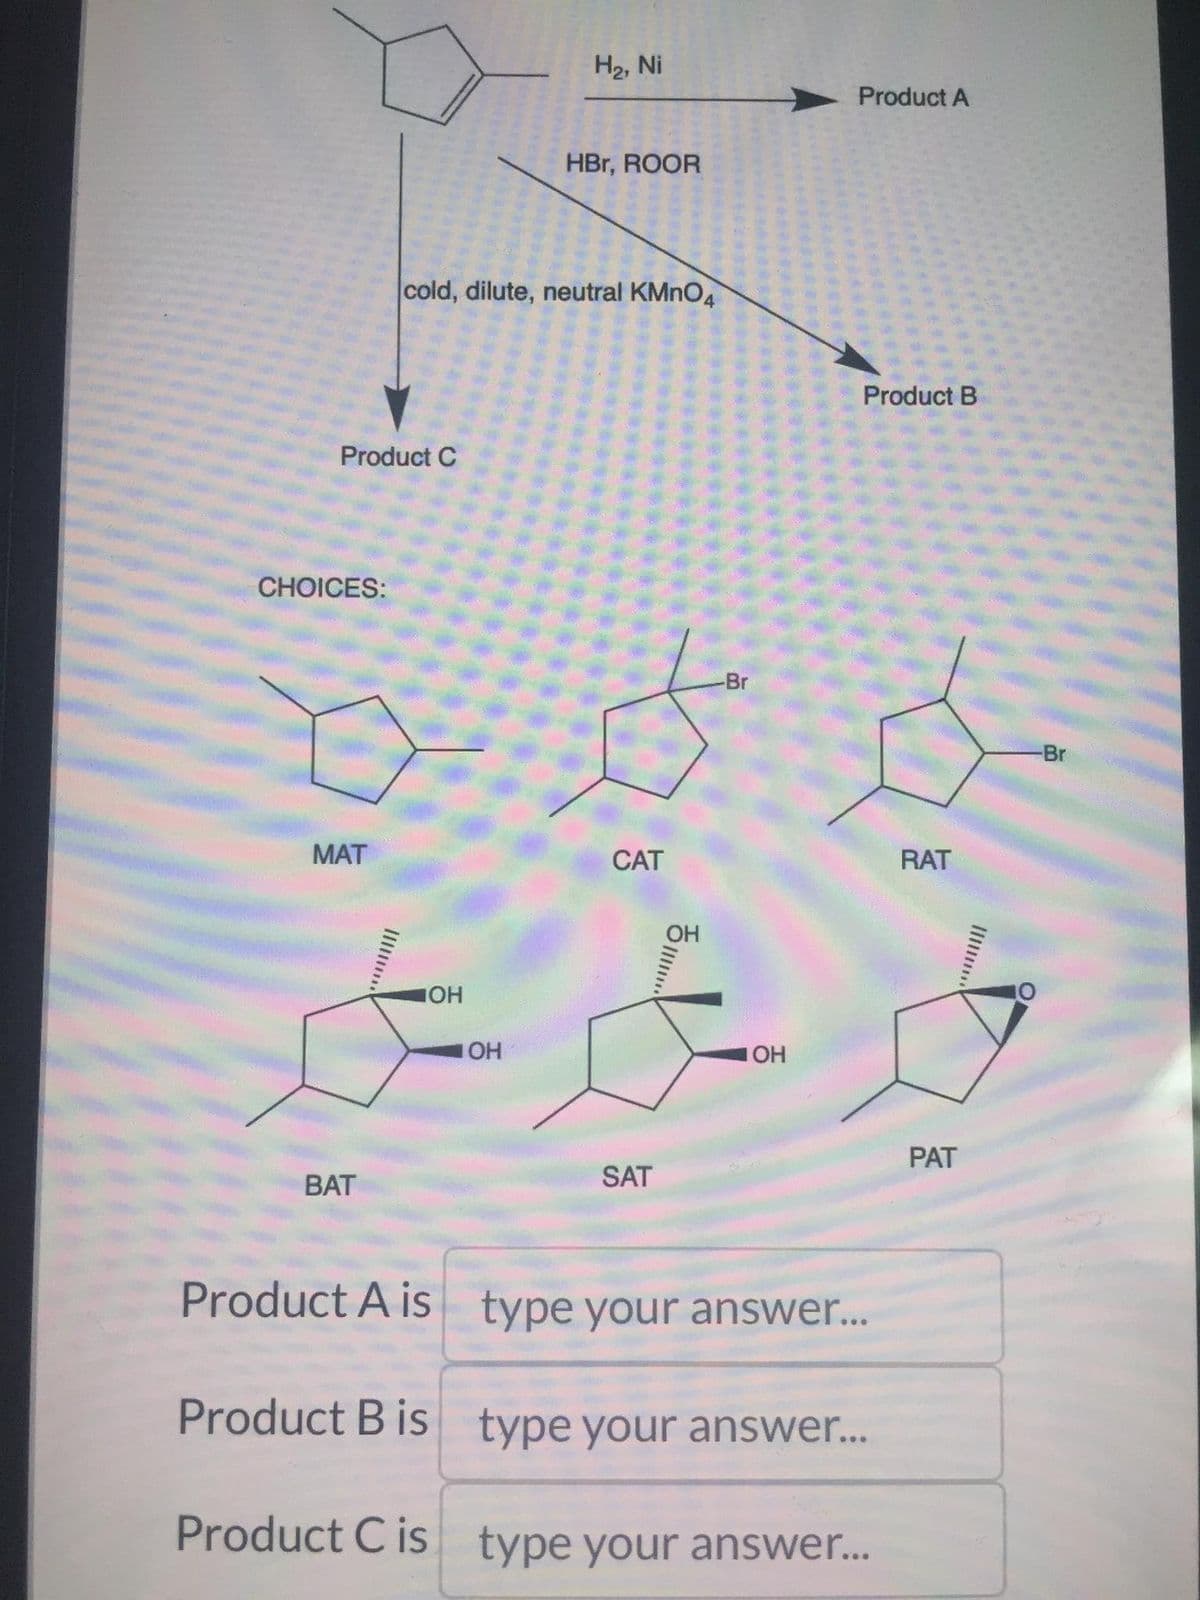 Product C
CHOICES:
MAT
BAT
cold, dilute, neutral KMnO4
IOH
H₂, Ni
Product A is
Product B is
Product C is
HBr, ROOR
-Br
ood
IOH
**
CAT
SAT
ㅎ.....!
Product A
IOH
Product B
type your answer...
type your answer...
type your answer...
RAT
PAT
-Br